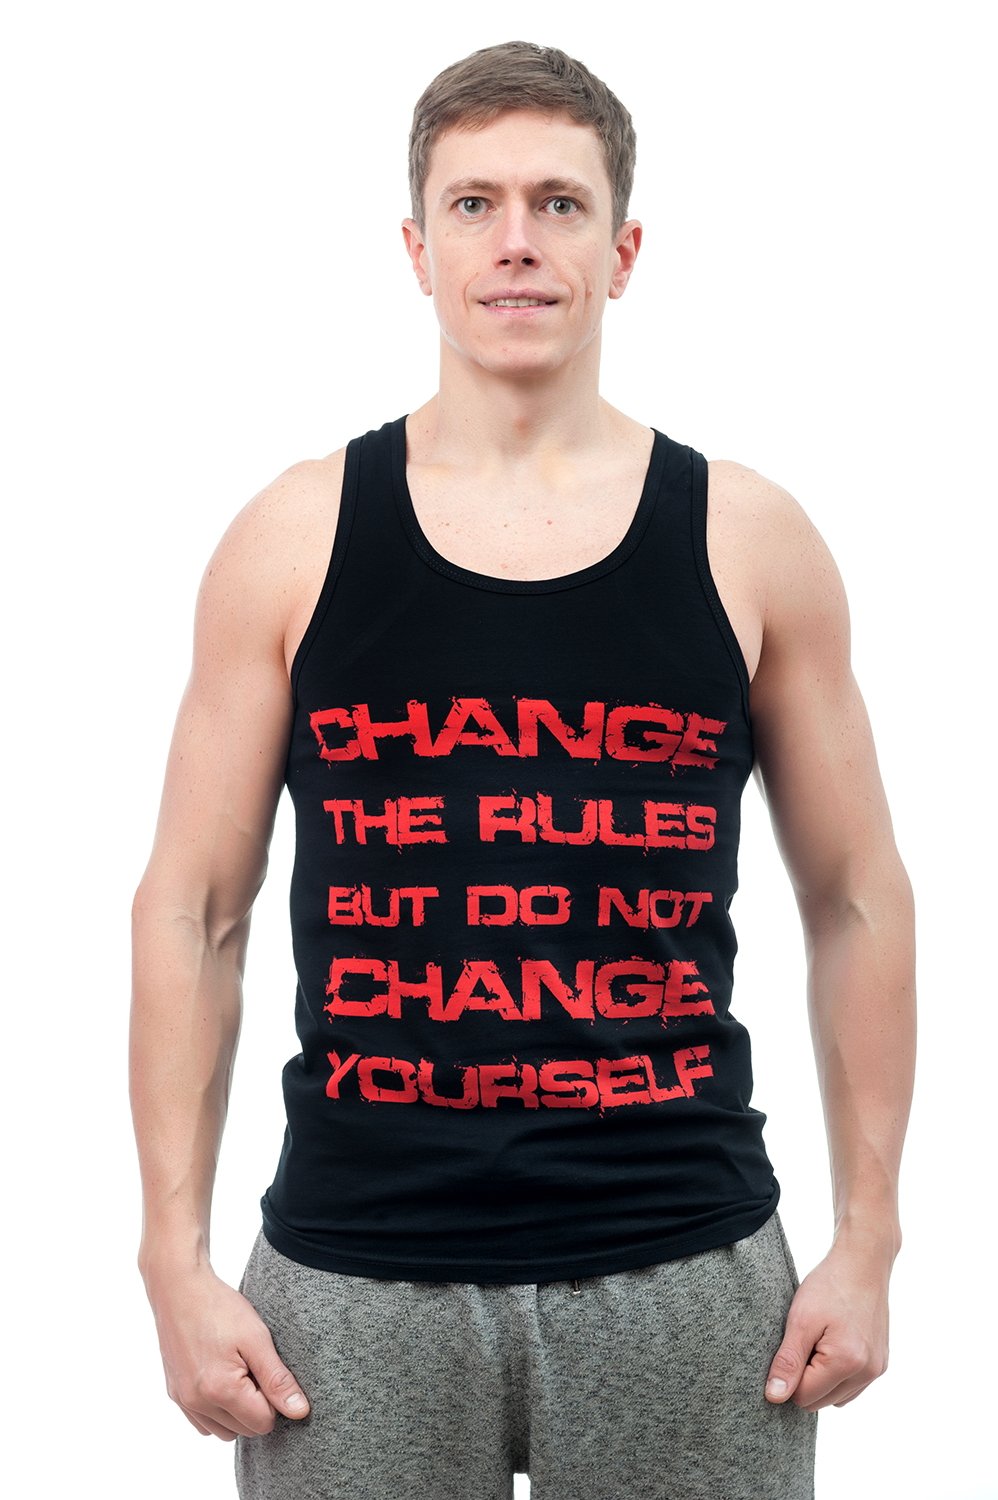 Men's T-shirt Change the rules, black, red print, size S